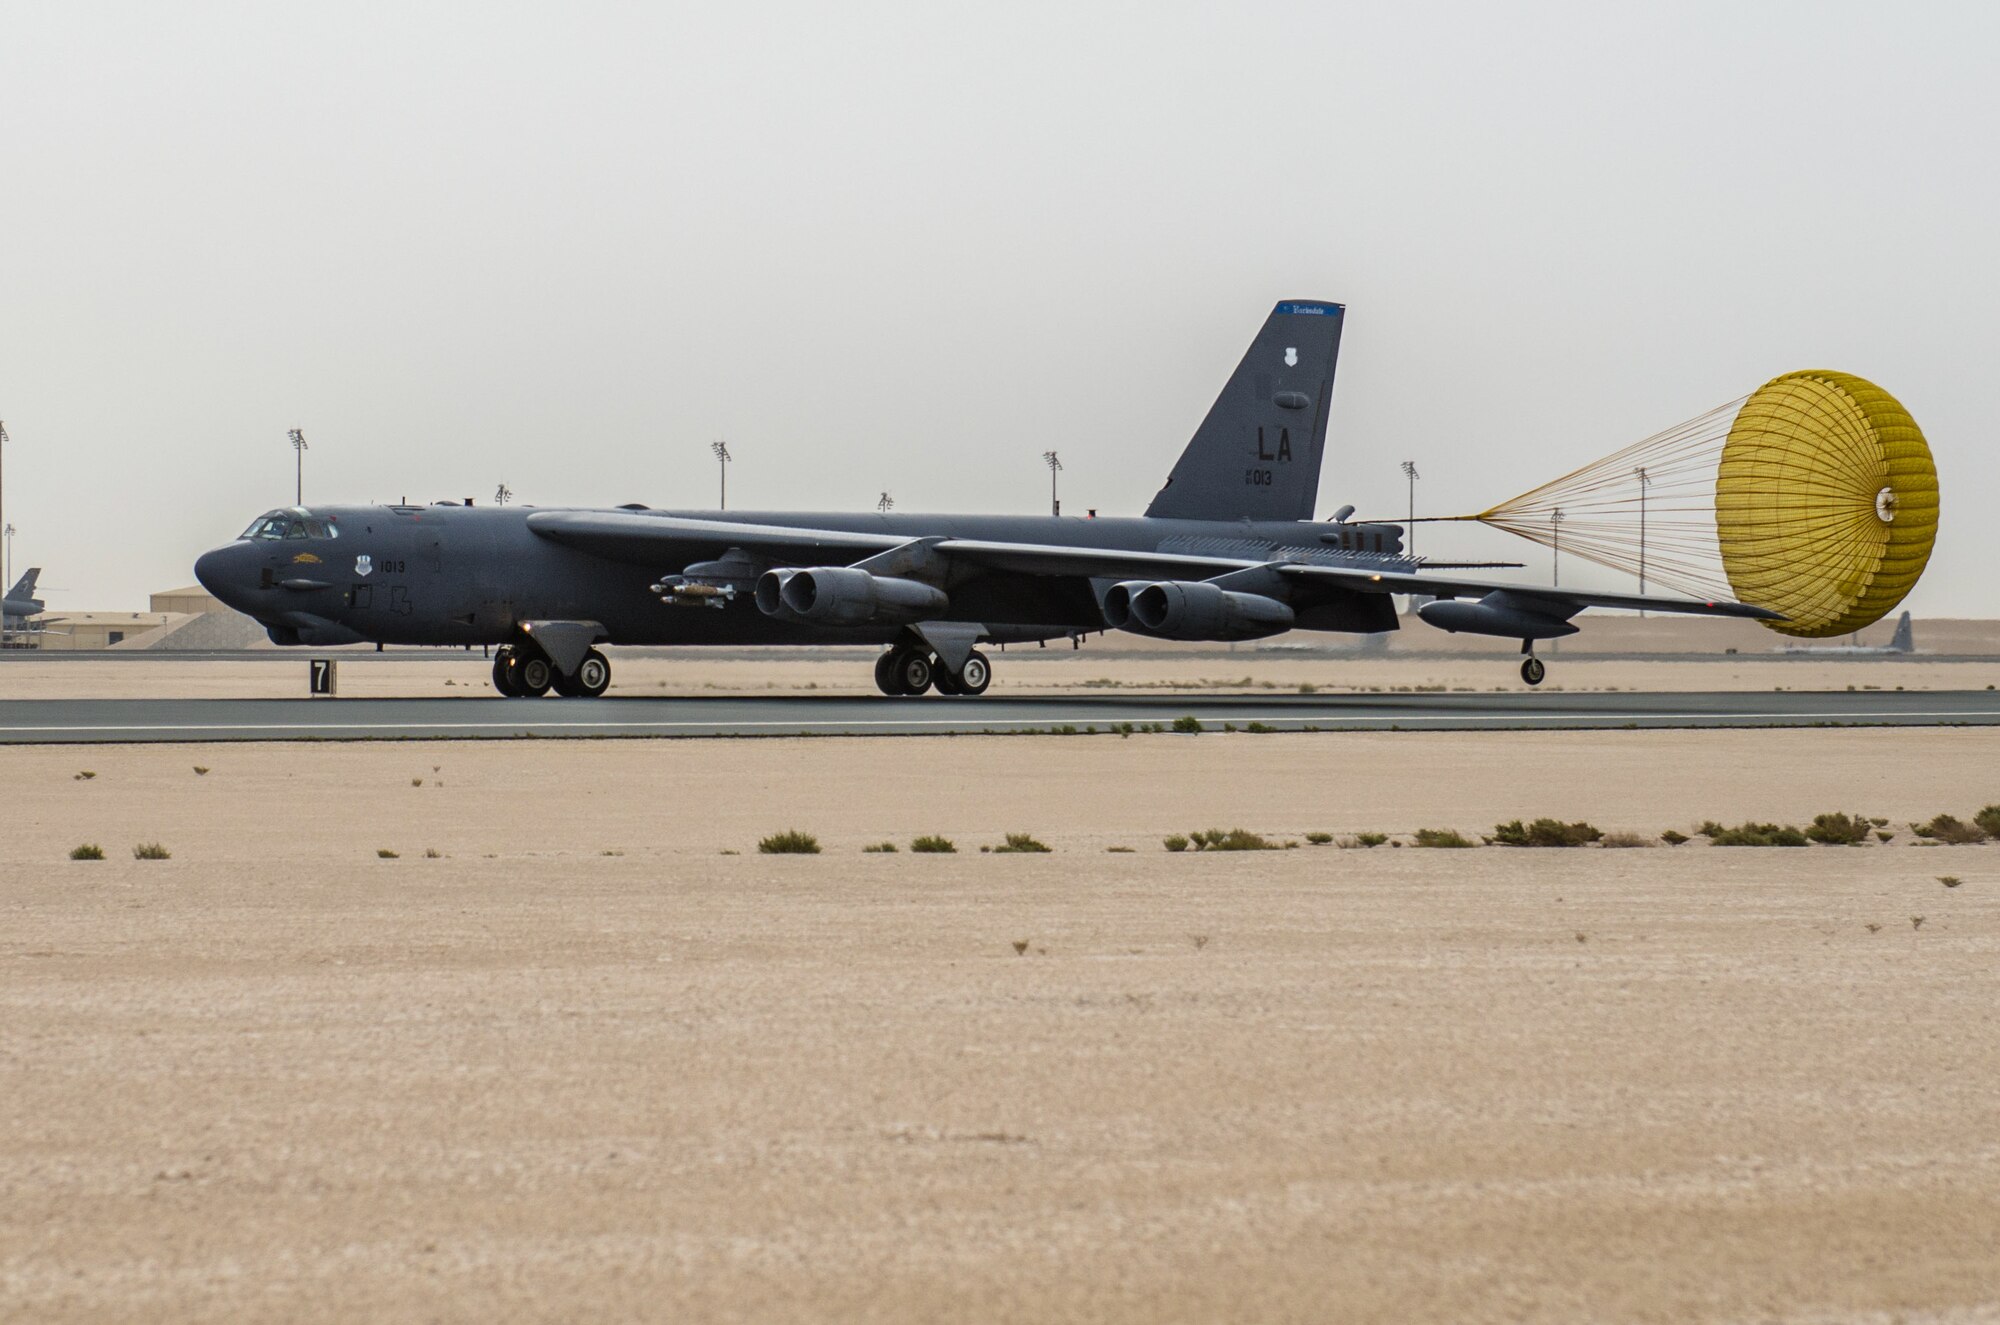 A B-52 Stratofortress aircraft assigned to the 69th Expeditionary Bomb Squadron lands at Al Udeid Air Base, Qatar, April 8, 2018, signifying the completion of its last sortie here before turning over the bomber mission to the newly arrived B-1B Lancer.  Since its arrival in 2016, the BUFF flew more than 1,800 sorties and employed nearly 12,000 weapons against ISIS and Taliban targets. (U.S. Air Force photo by Staff Sgt. Patrick Evenson)